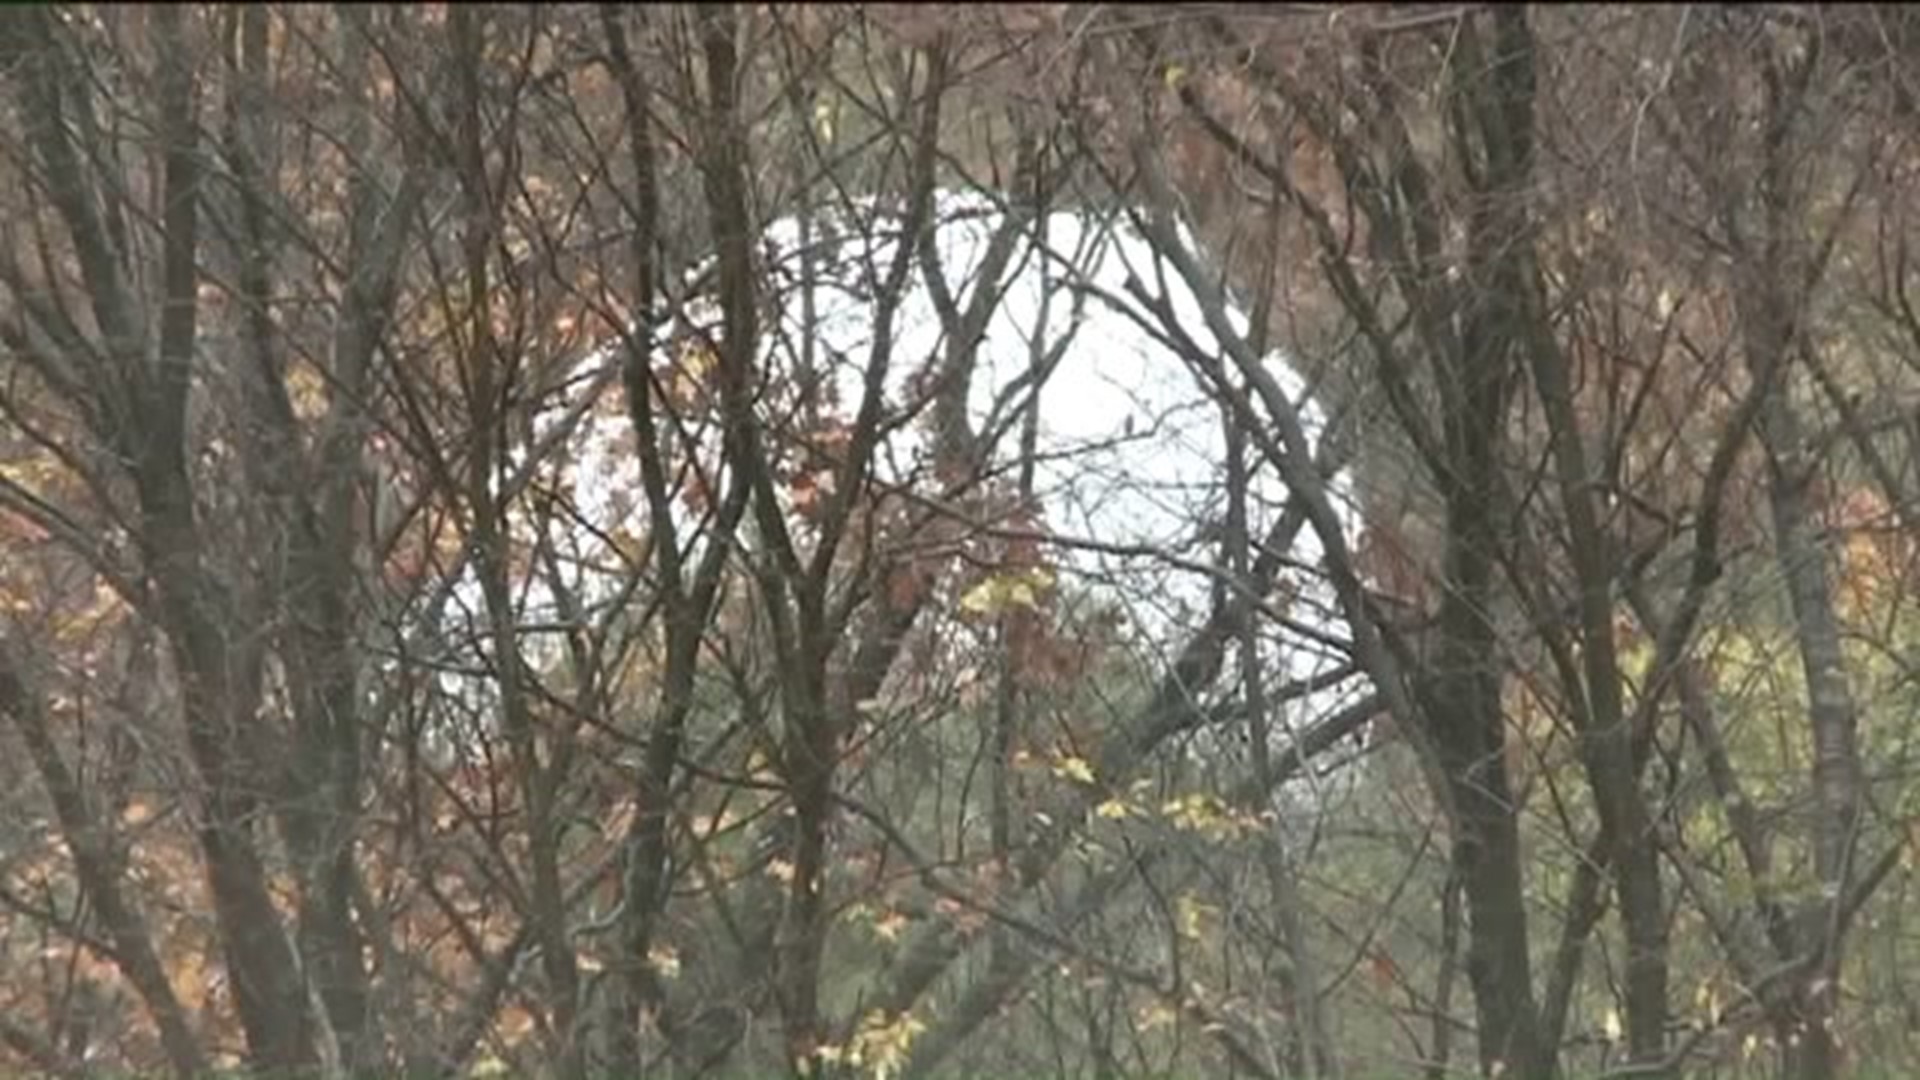 Residents Flock To See Downed Army Blimp in Wooded Field